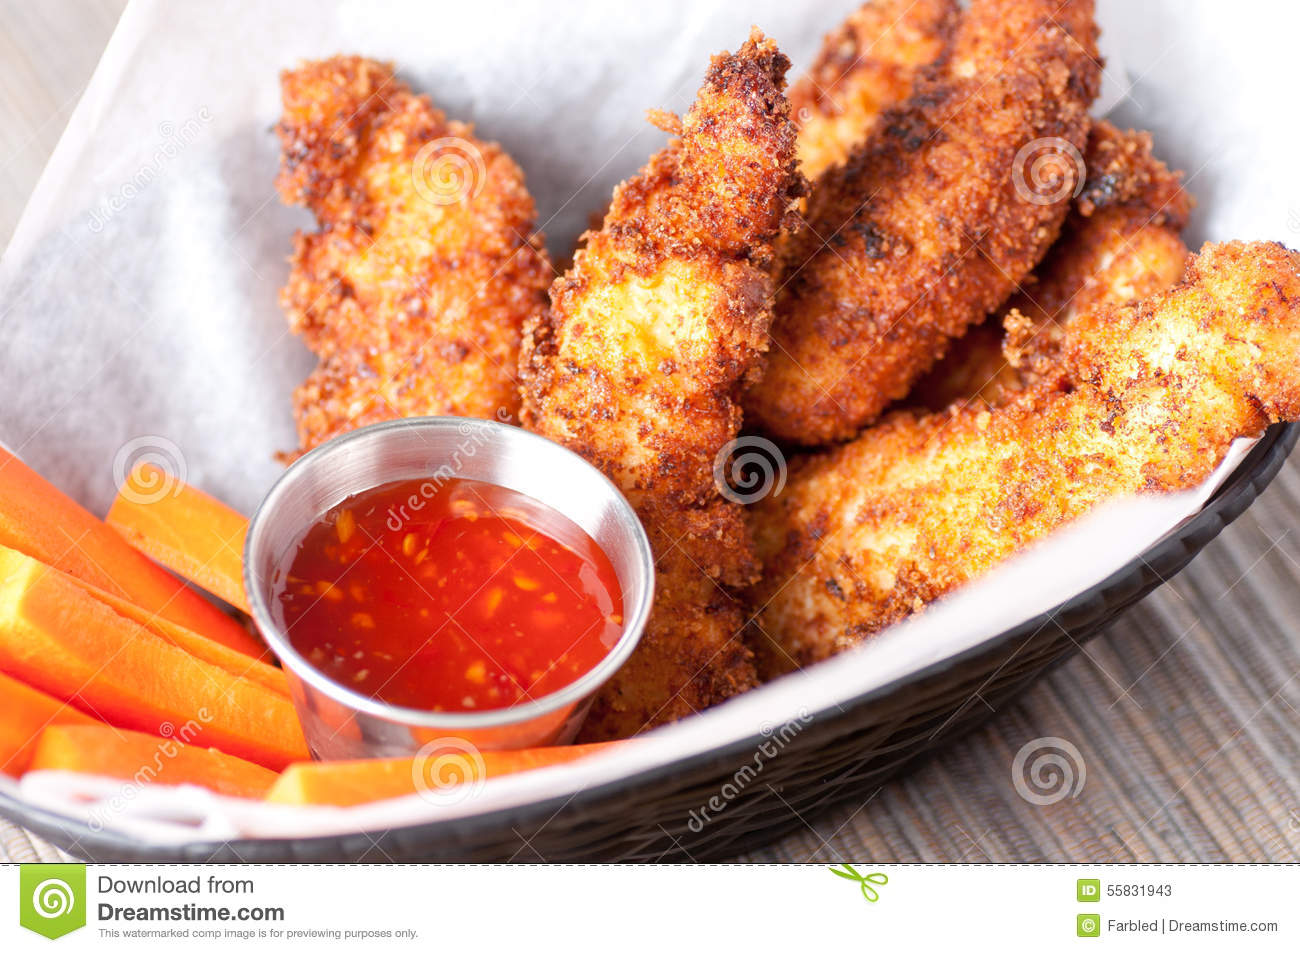 Chicken Tenders Or Strips With A Spicy Chilli Sauce And Vegetable